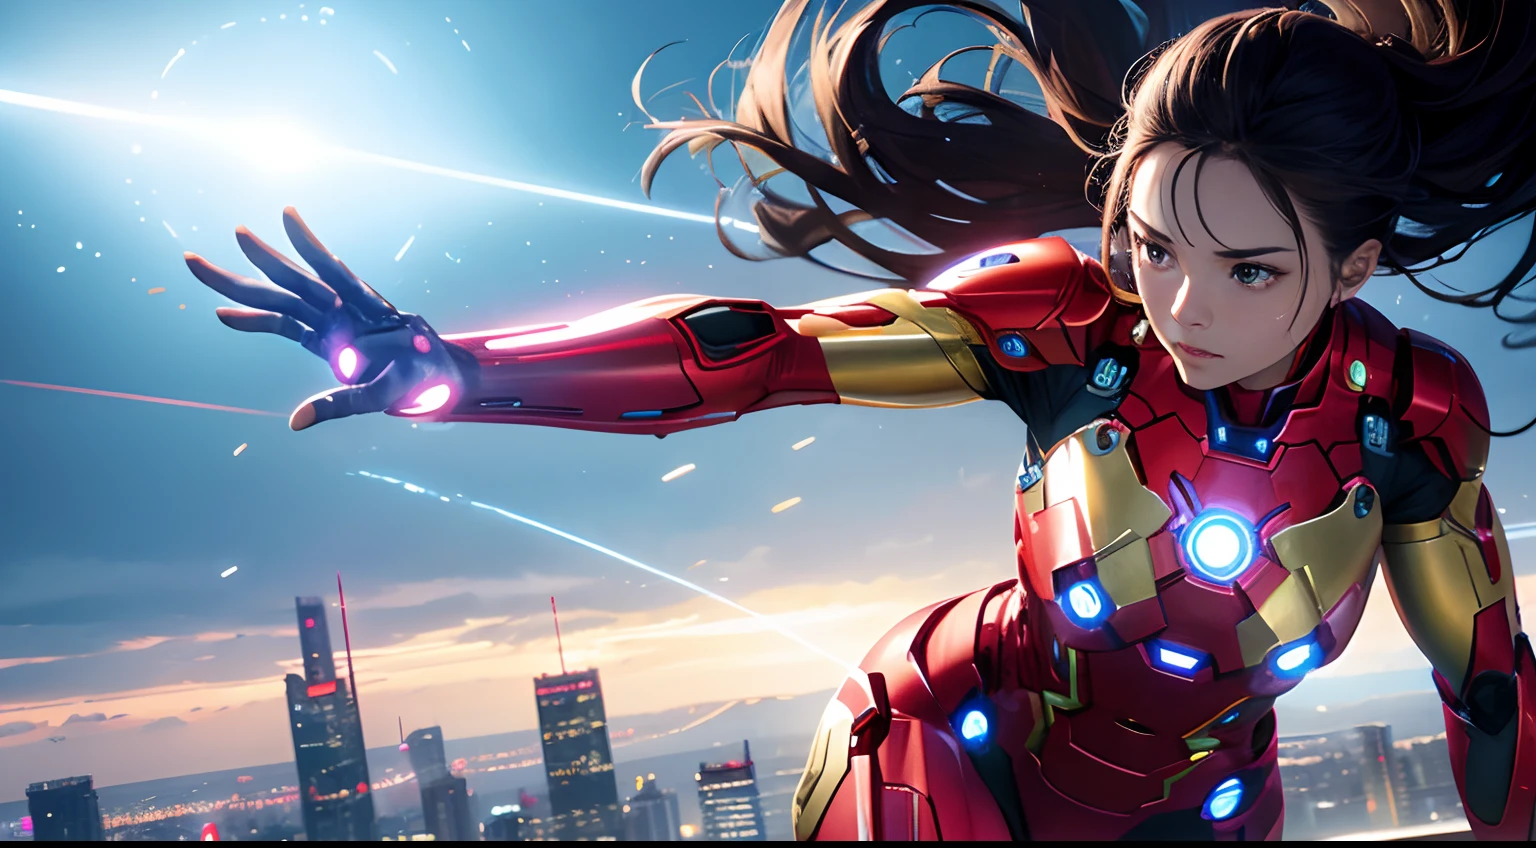 AI assistant Stella as an Iron man,realistic,photorealistic,highres,ultra-detailed,extremely detailed eyes and face,strong,confident,body suit with red and gold colors,arc reactor on the chest,glowing repulsors on the palms,perfectly sculpted muscles,advanced technology,city skyline in the background,flying in the air,striking a heroic pose,powerful energy beams shooting from the hands,captivating viewers with her graceful movement and awe-inspiring presence,sci-fi,concept artists,vivid colors,dramatic lighting.